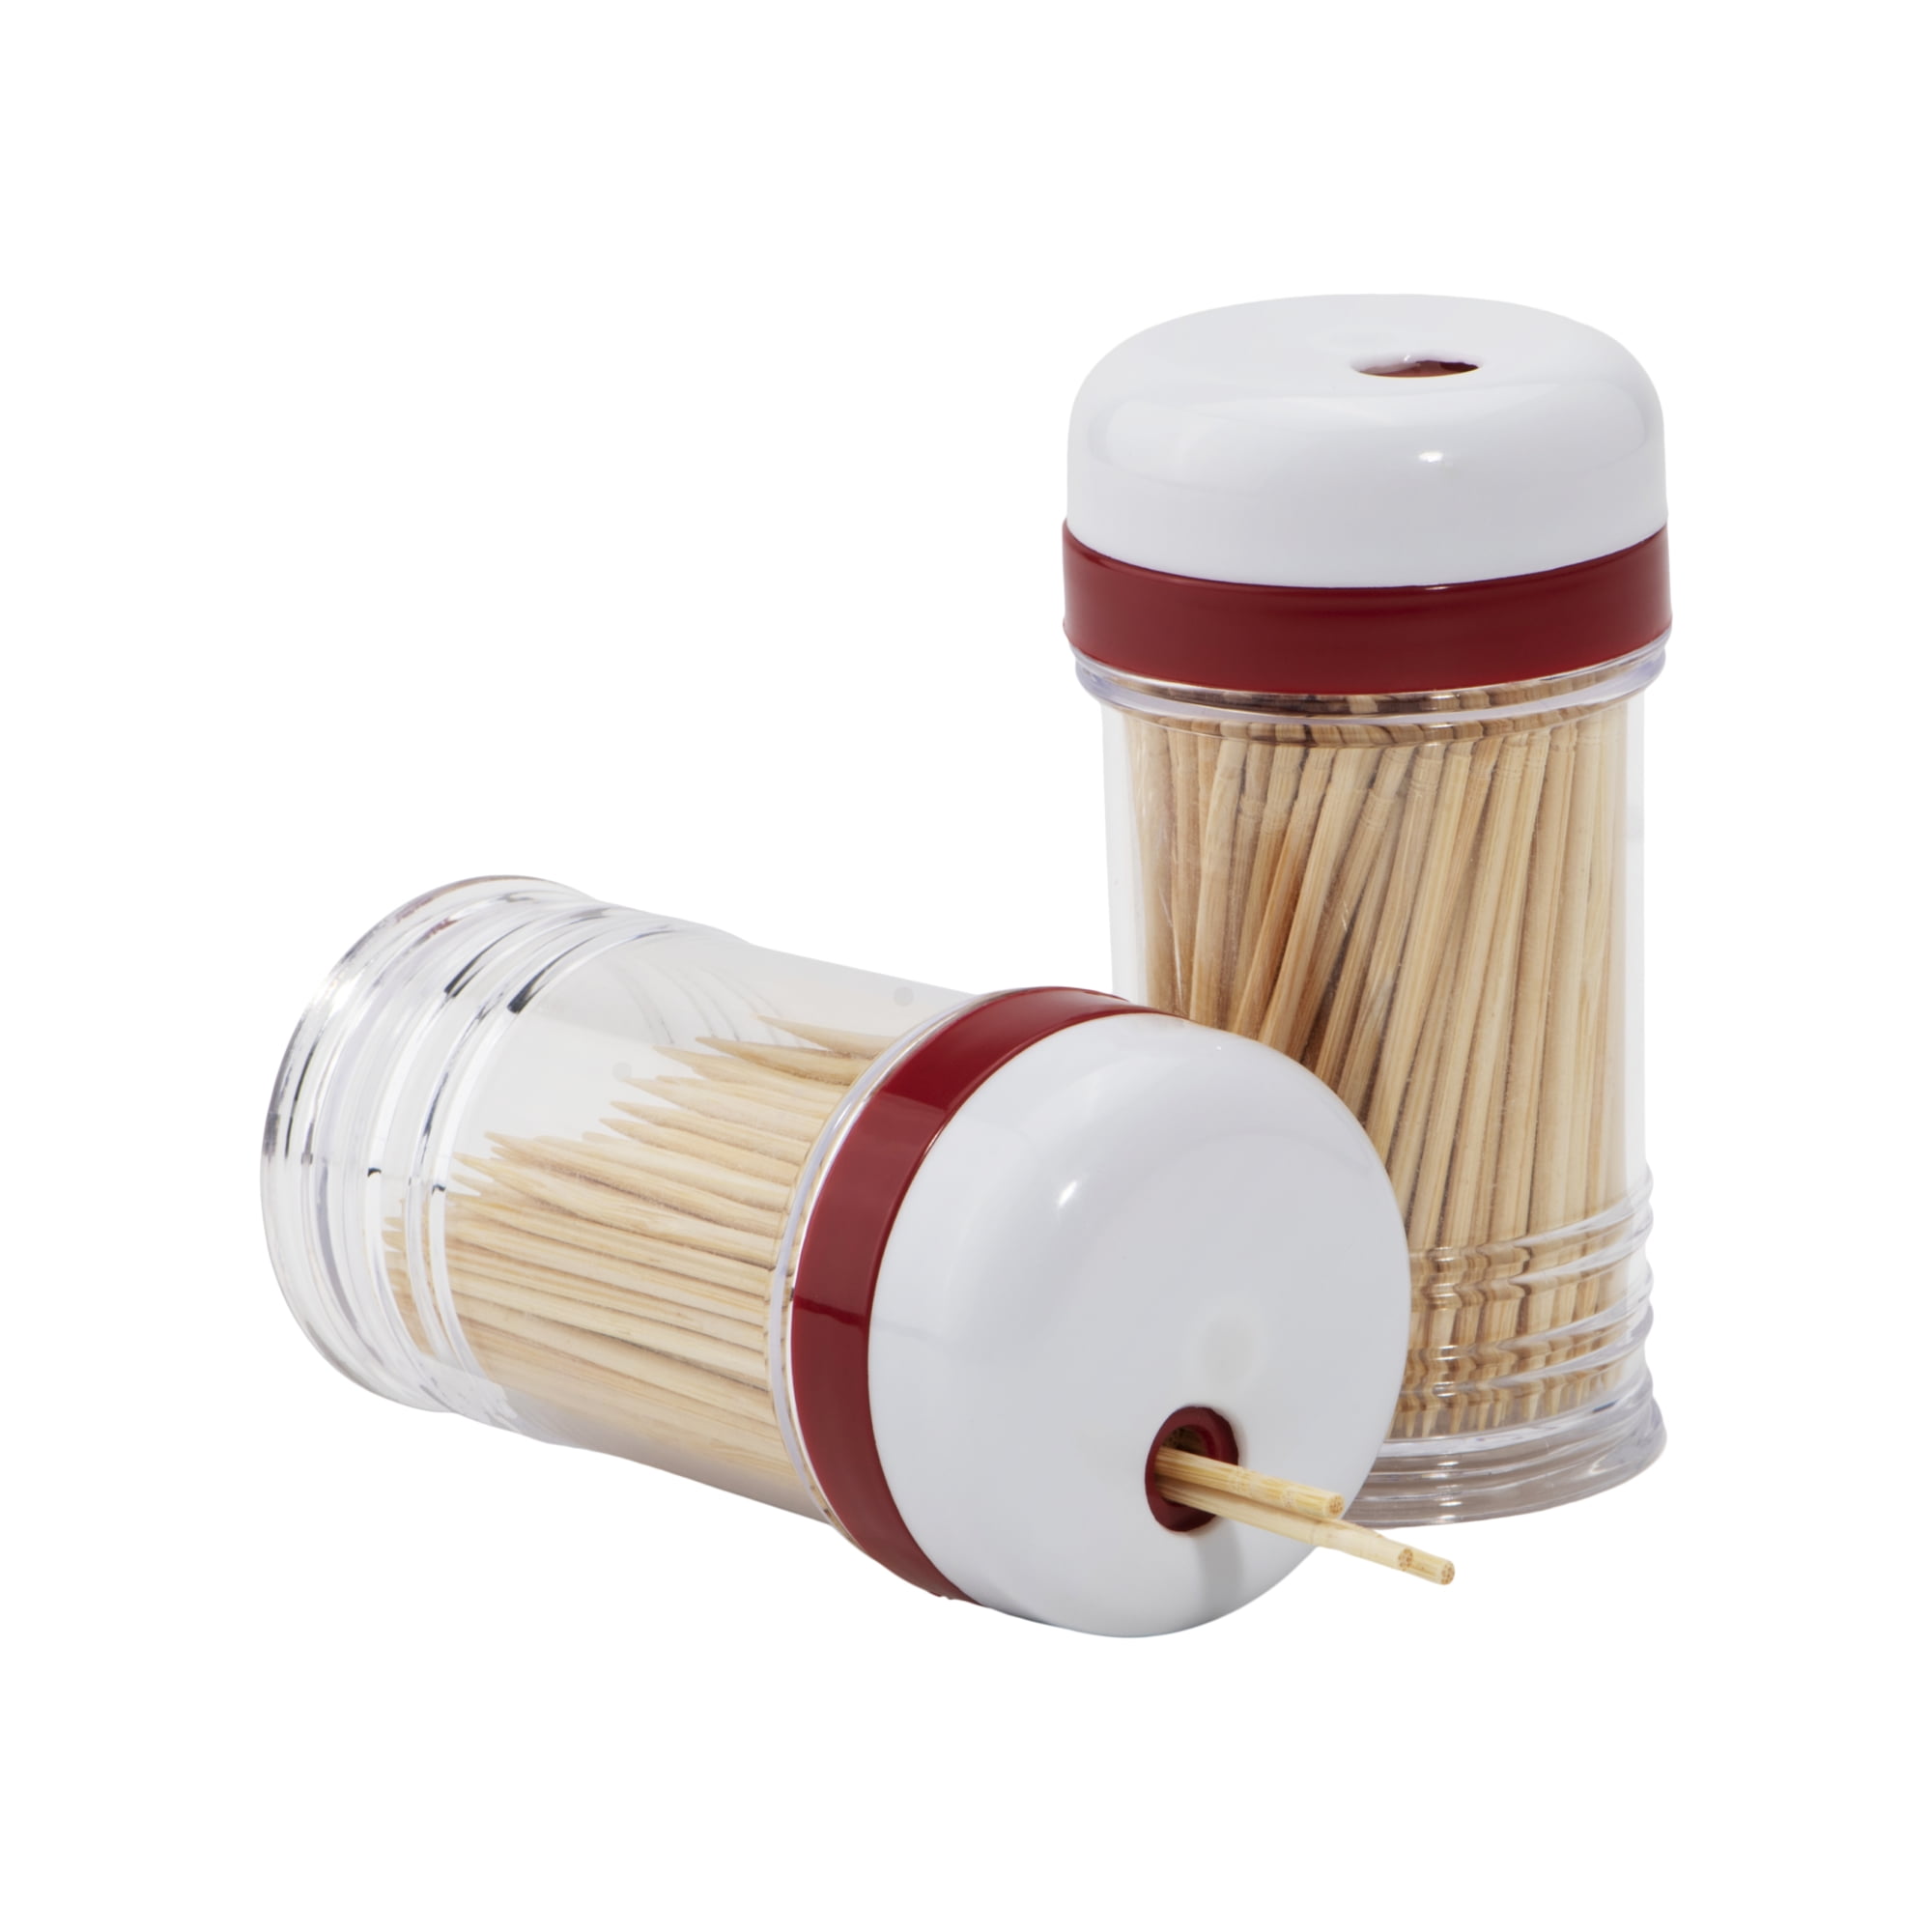 GoodCook PROfreshionals 2-Piece Shake-A-Pick Toothpick Dispenser Set with 400 Bamboo Toothpicks